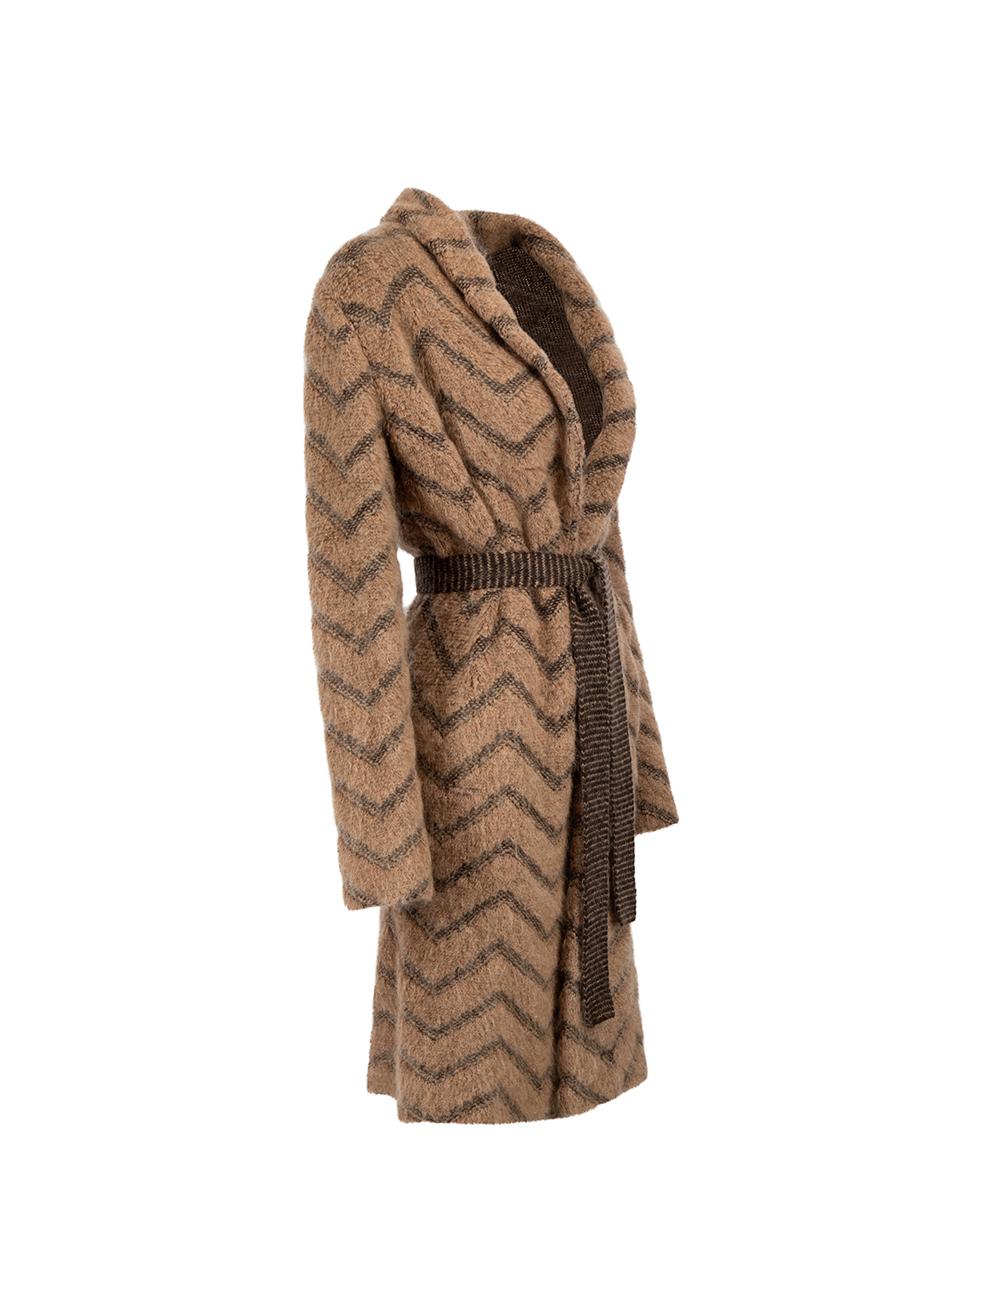 CONDITION is Never worn, with tags. No visible wear to cardigan is evident on this new Missoni designer resale item.



Details


Brown

Wool

Knit cardigan

Long

Zigzag pattern

2x Side pockets

Tie belt included





Made in